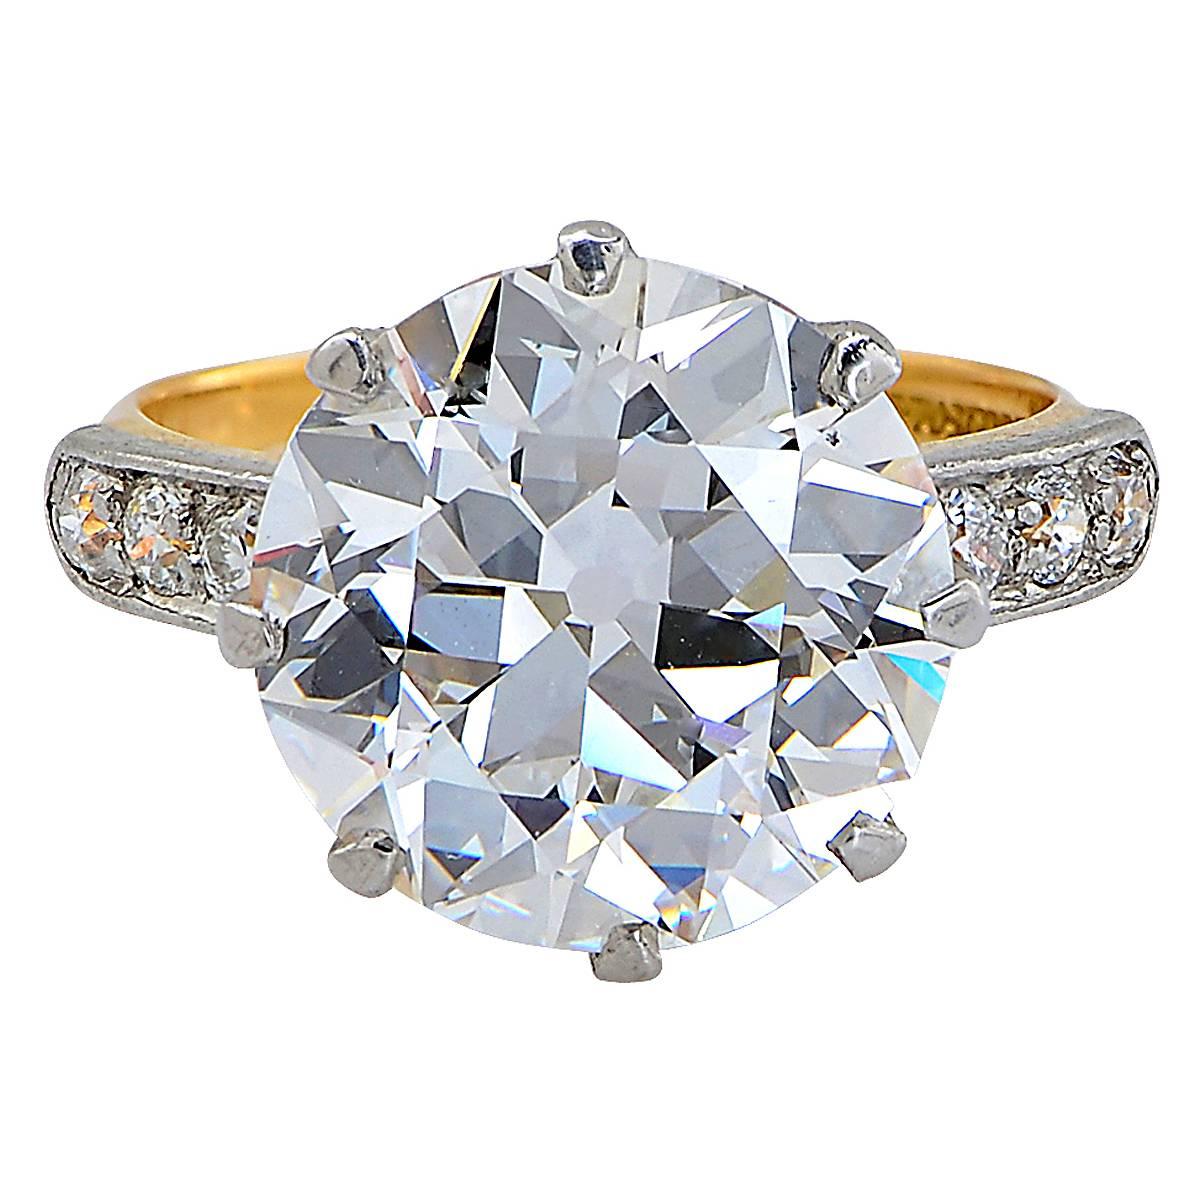 Tiffany & Co. Platinum Over Gold Ring Containing a 6.40ct, G Color, VVS2 Clarity, GIA Graded Old European Cut Diamond Flanked by 6 Old European Cut Diamonds Appoximately .10cts, F Color, VS Clarity - Circa 1920's. The Ring Size is Currently 5 but